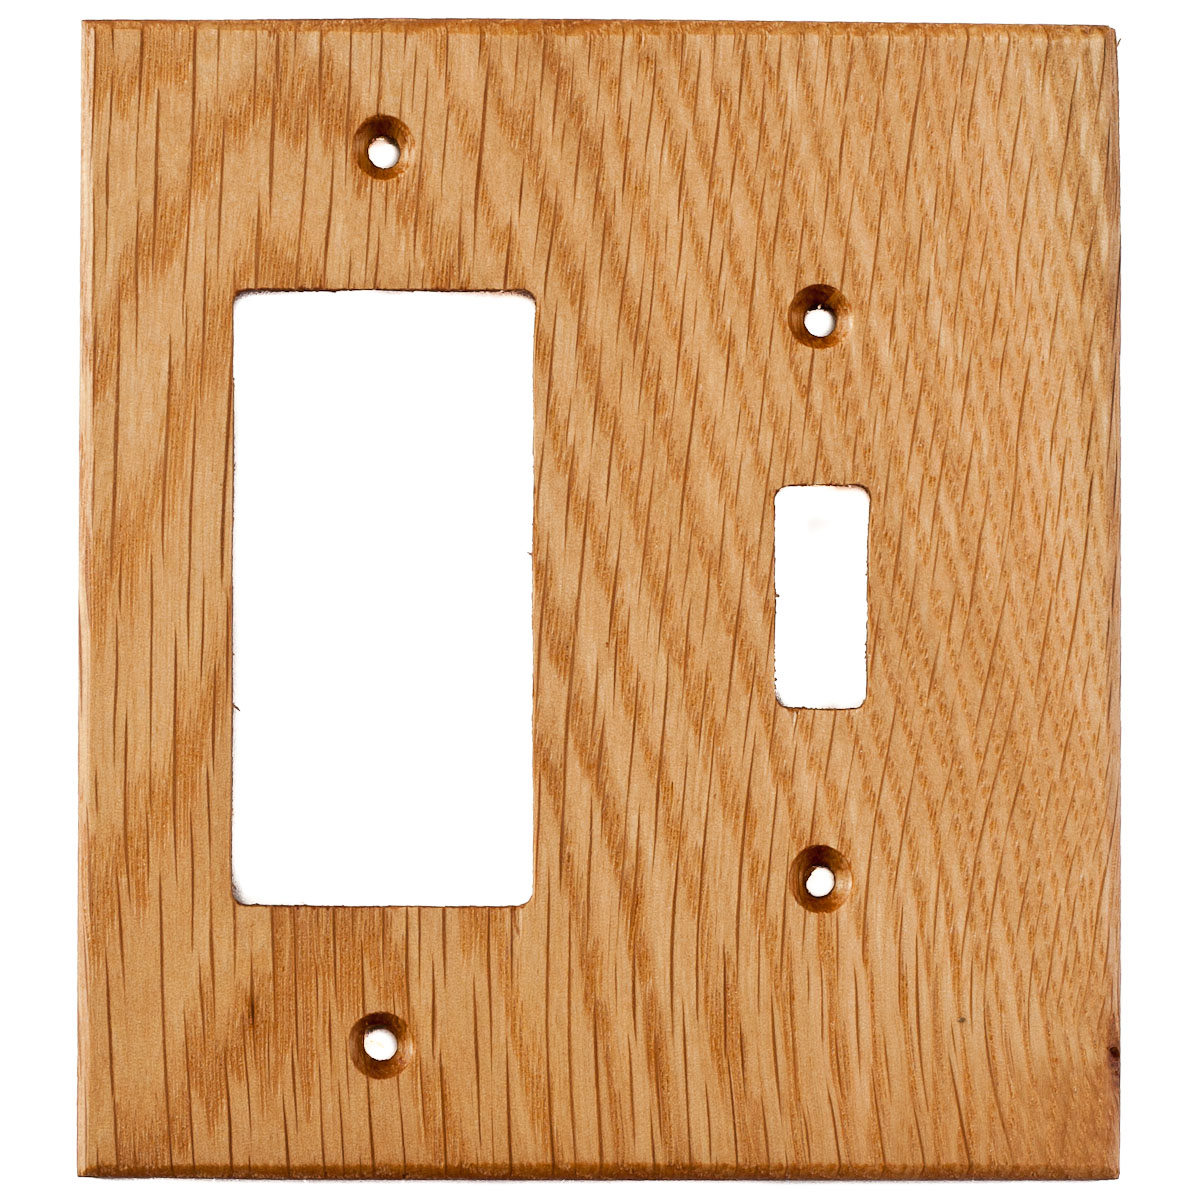 2 Outlet wooden wall electrical plate 